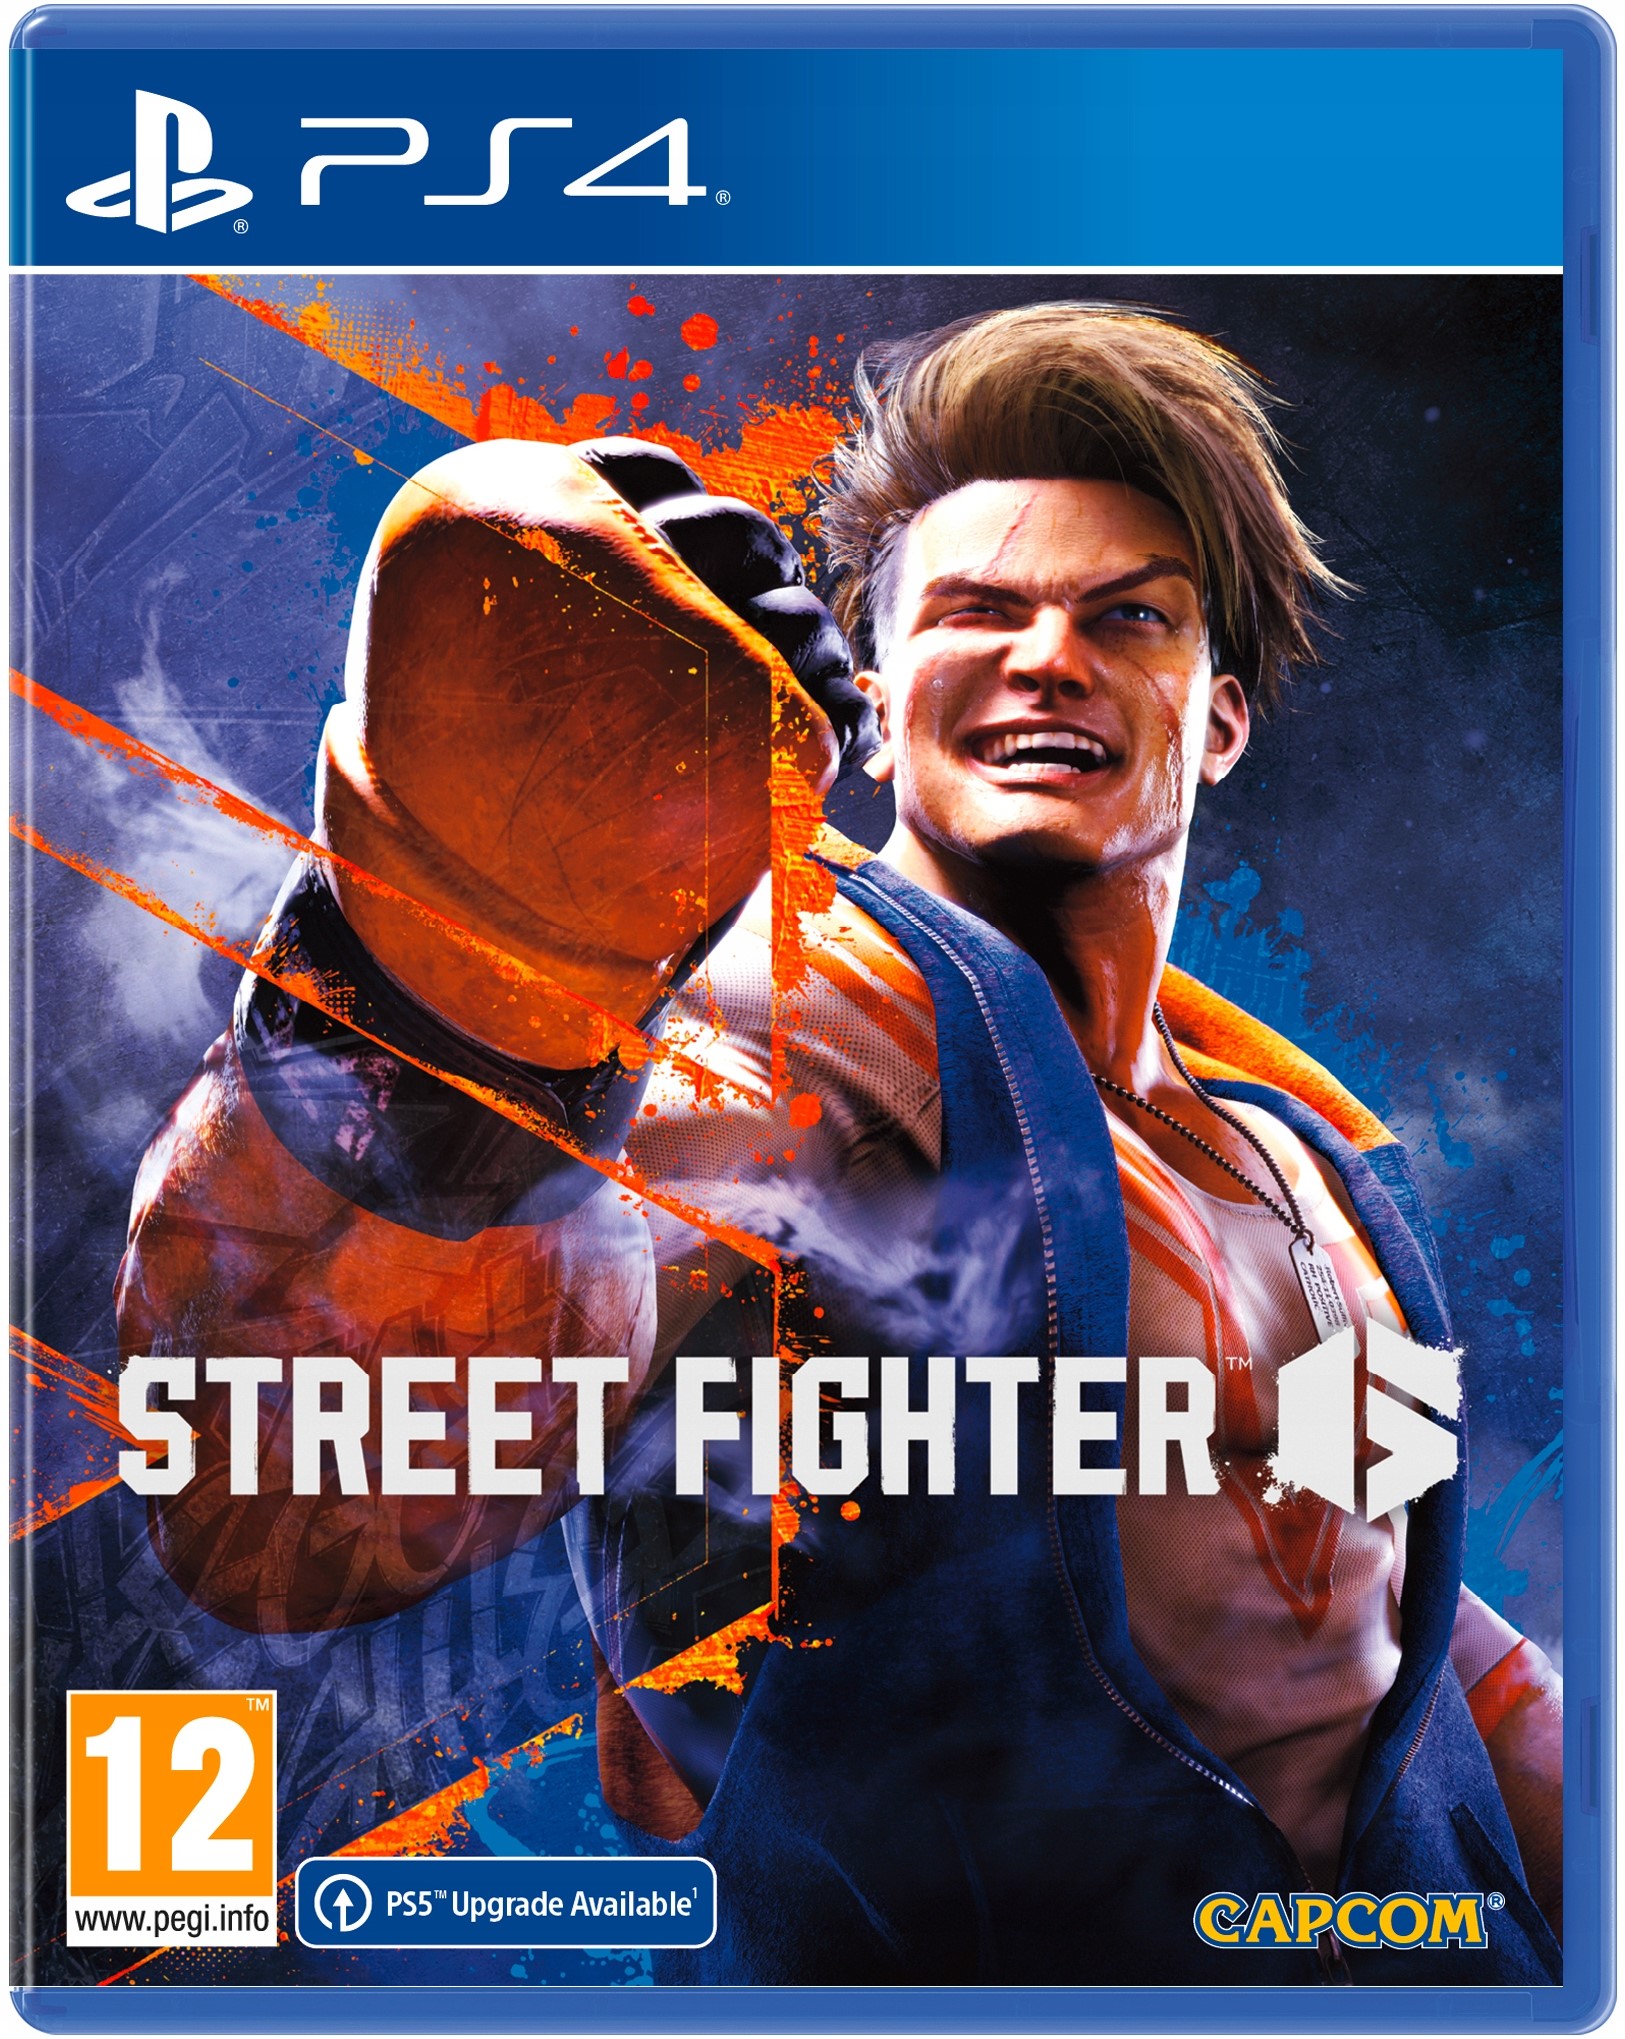 Street Fighter 6 - PS4 NEW - PLAY Barbados